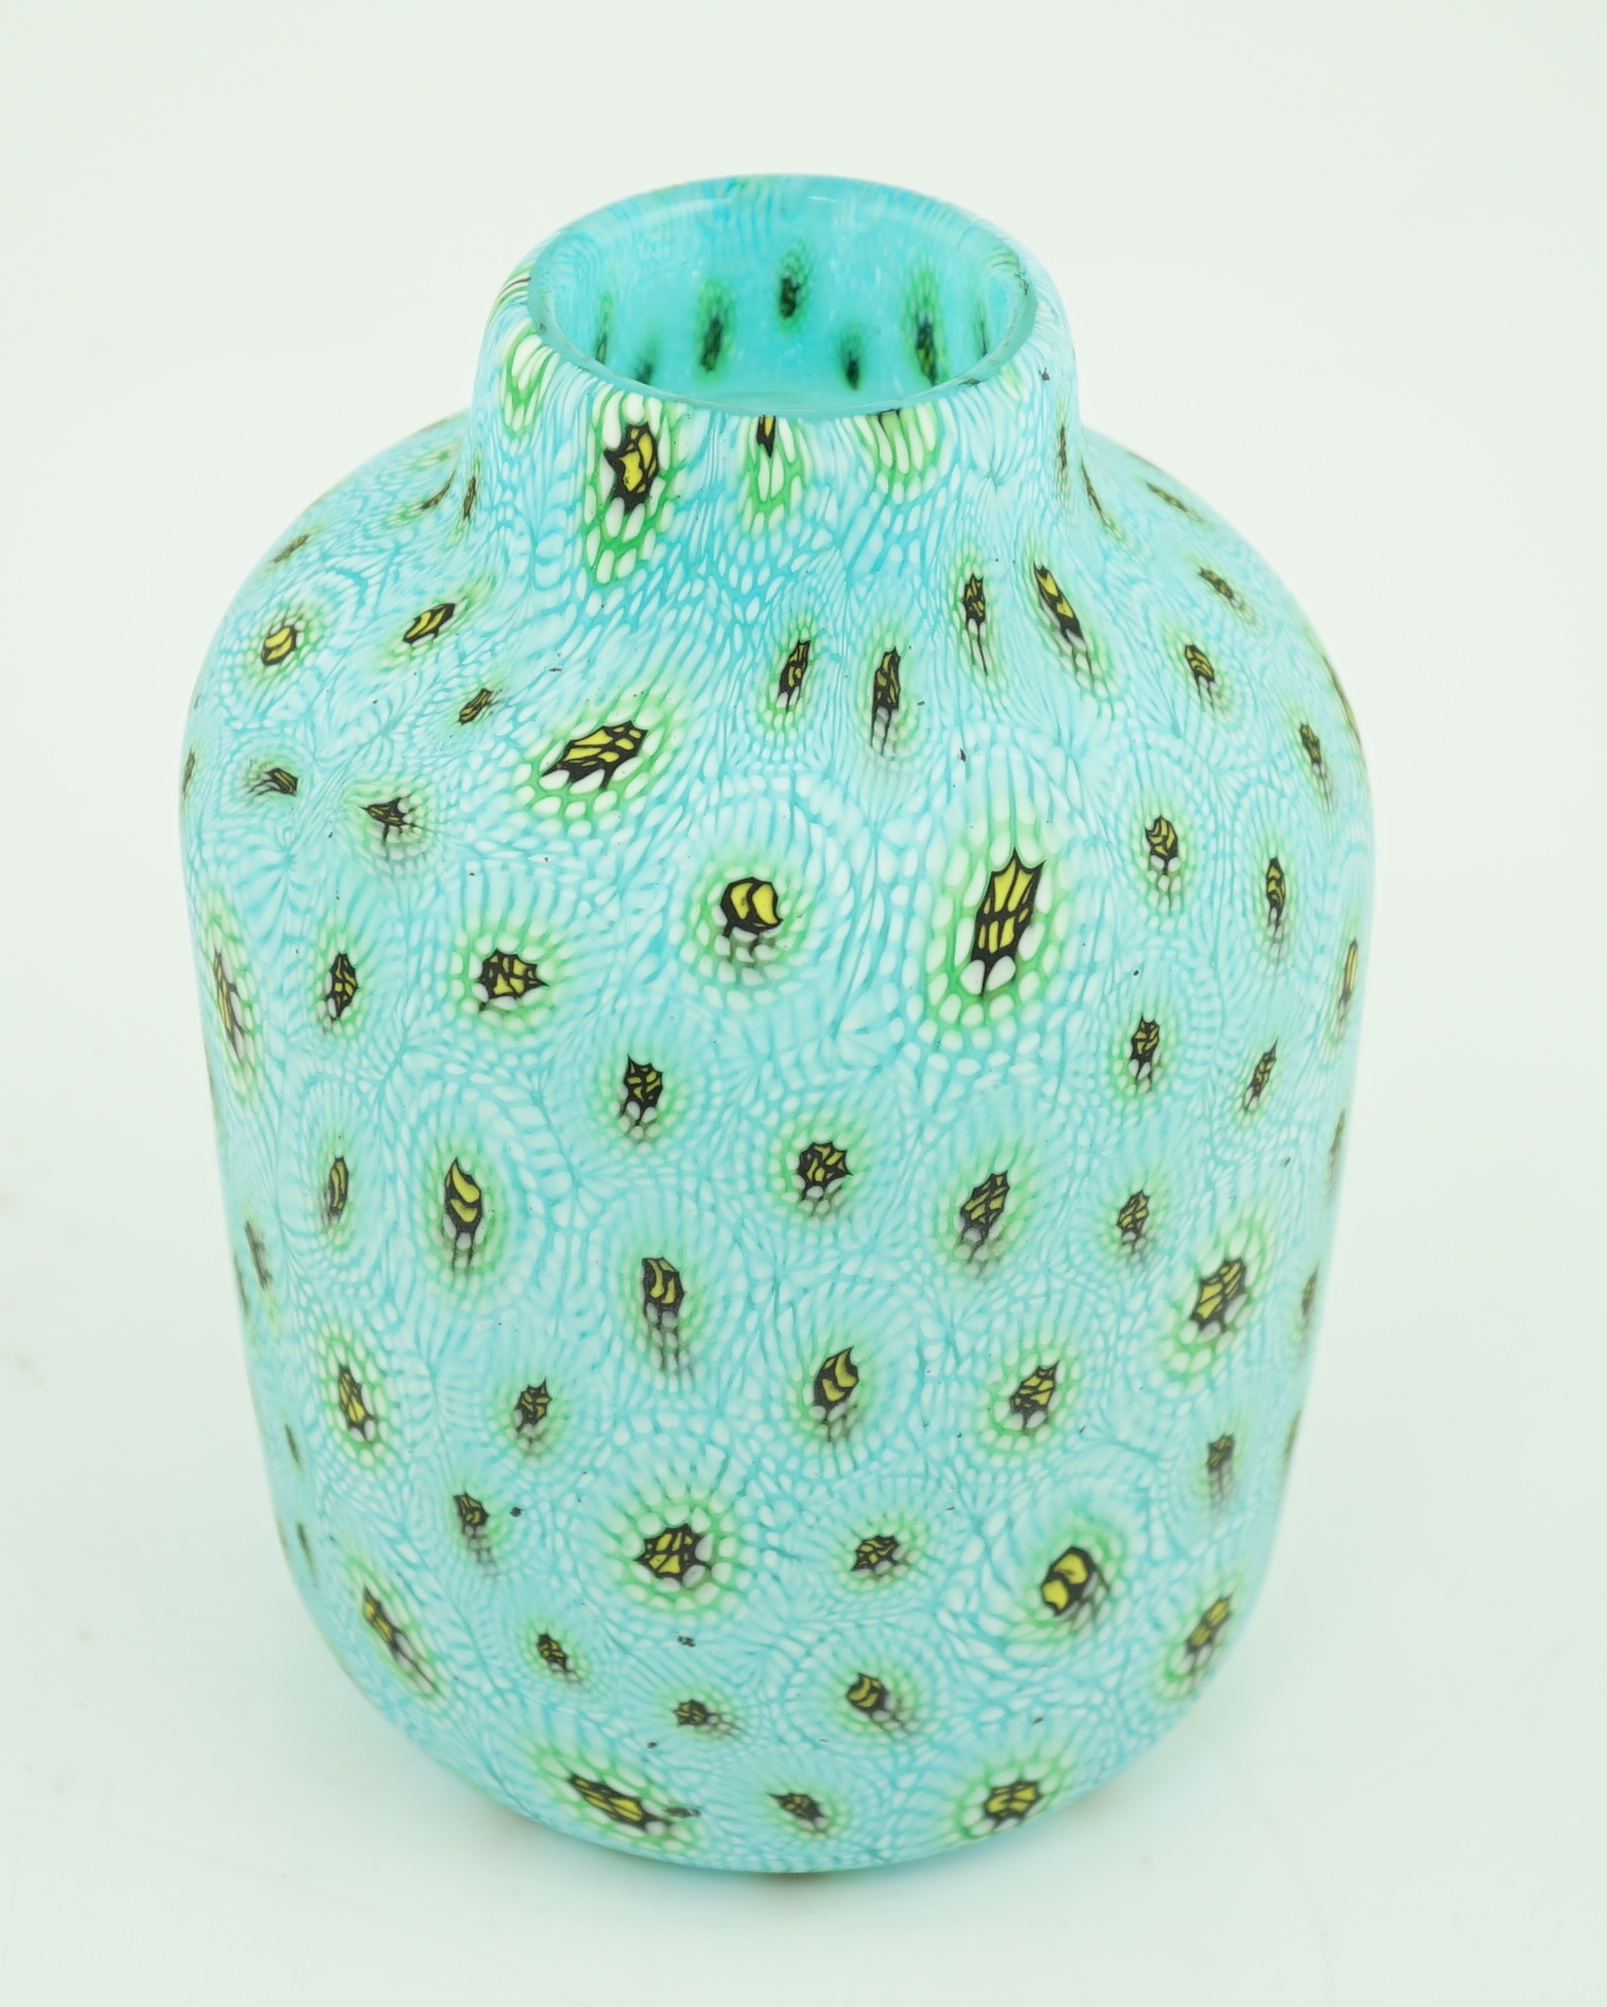 Vittorio Ferro (1932-2012) A Murano glass Murrine vase, with a yellow and green peacock feather ‘’eyes’’, design, on a turquoise ground, unsigned, 17.5cm, Please note this lot attracts an additional import tax of 20% on